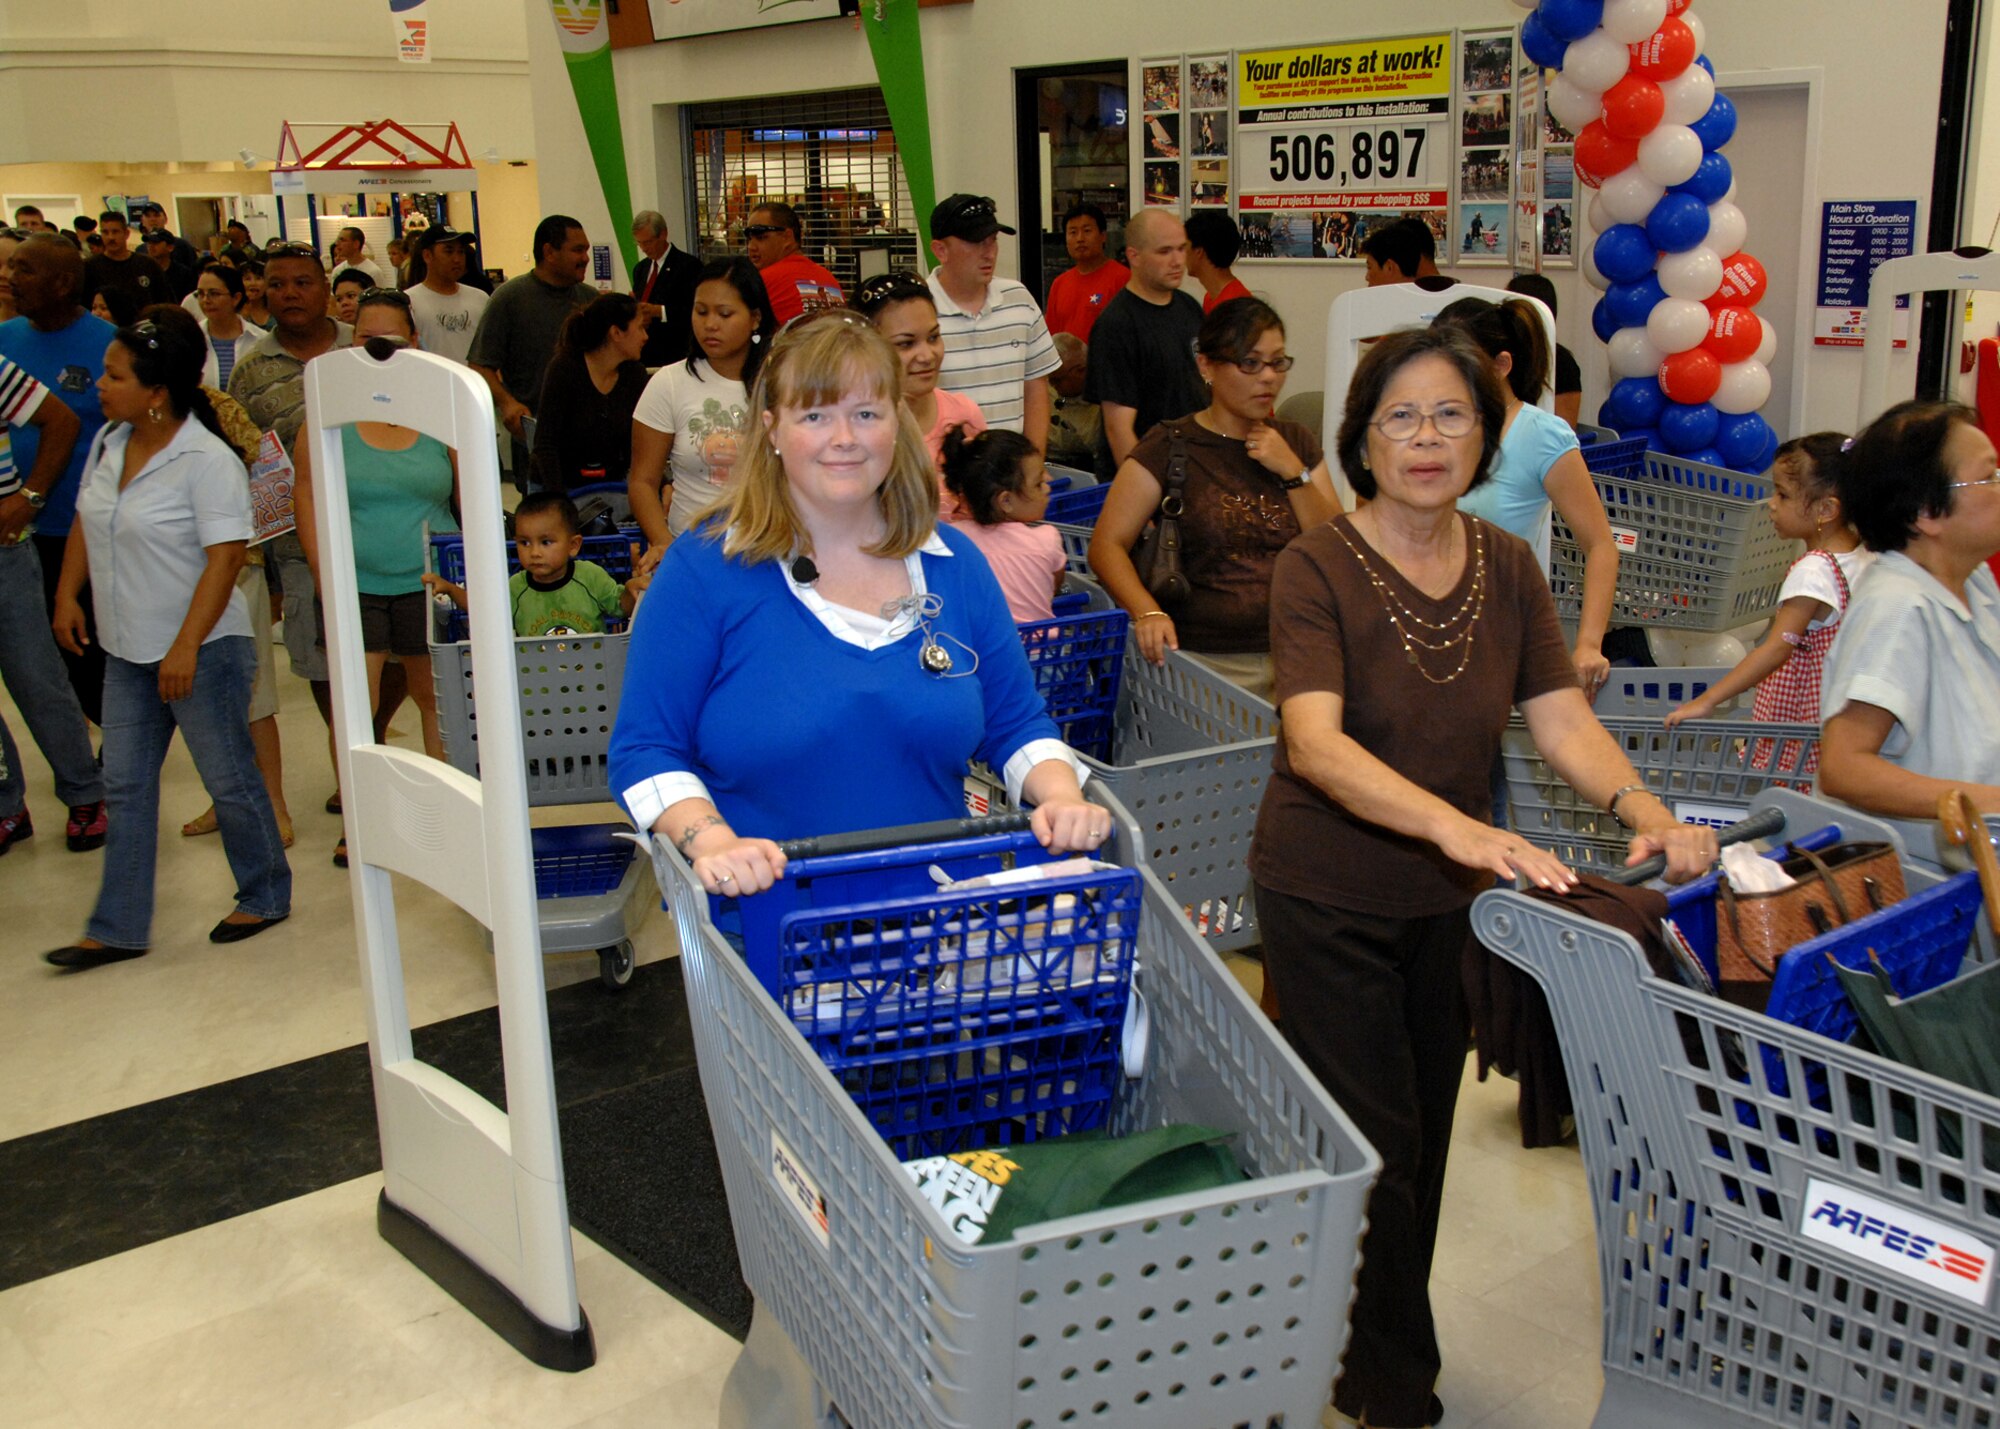 ANDERSEN AIR FORCE BASE, Guam - Members of Team Andersen and their families enter the new Base Exchange Sept. 10. The new shopping center is more than 181,000 square feet.   (U.S Air Force photo by Airman 1st Class Nichelle Griffiths)

